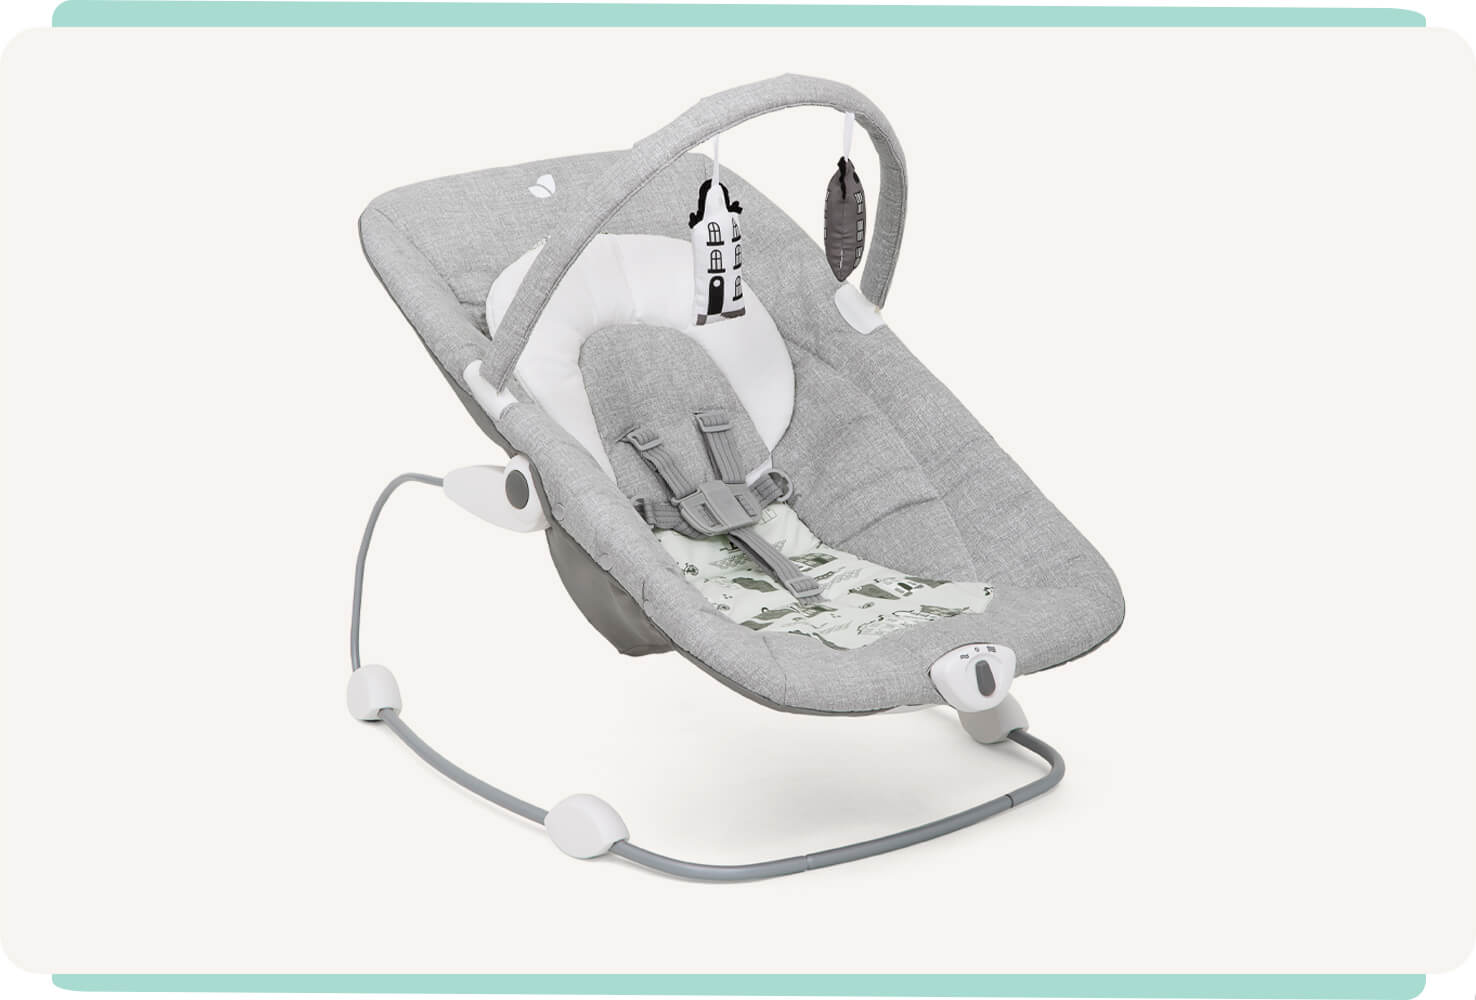   Joie light gray wish bouncer at a right angle.